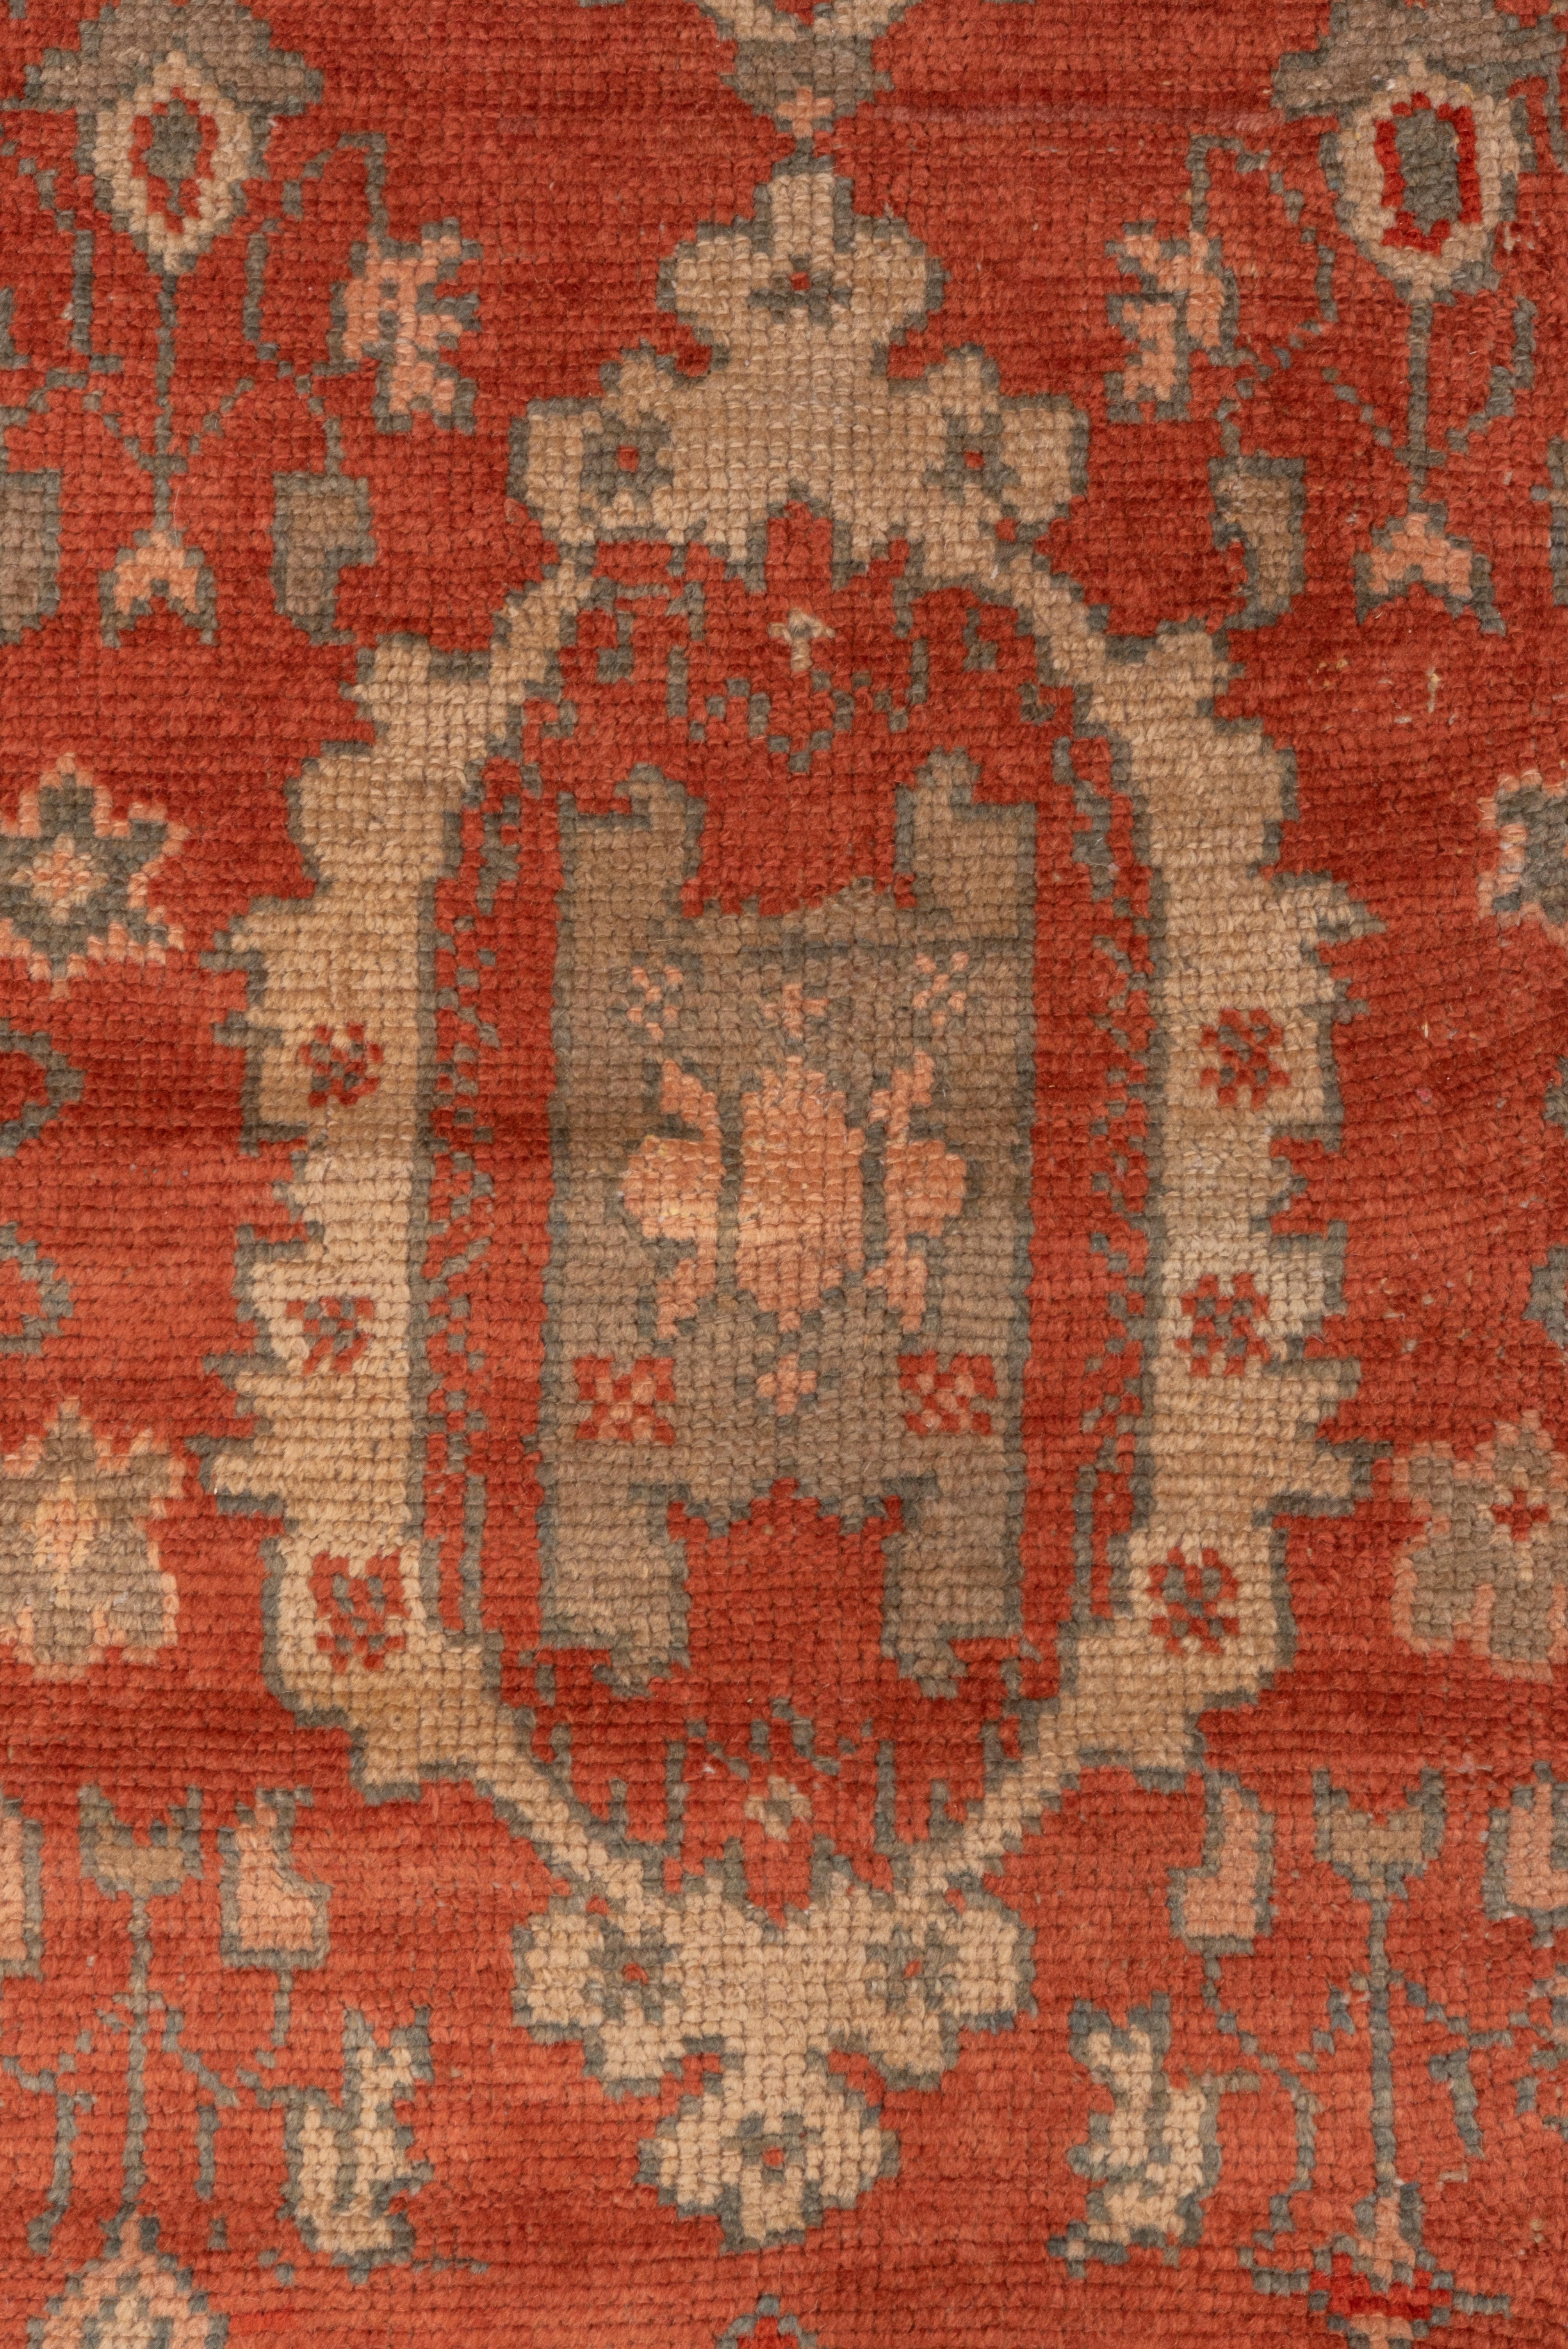 1900s Rare Antique Turkish Oushak Carpet, Rusty Red Allover Field, Green Borders For Sale 3